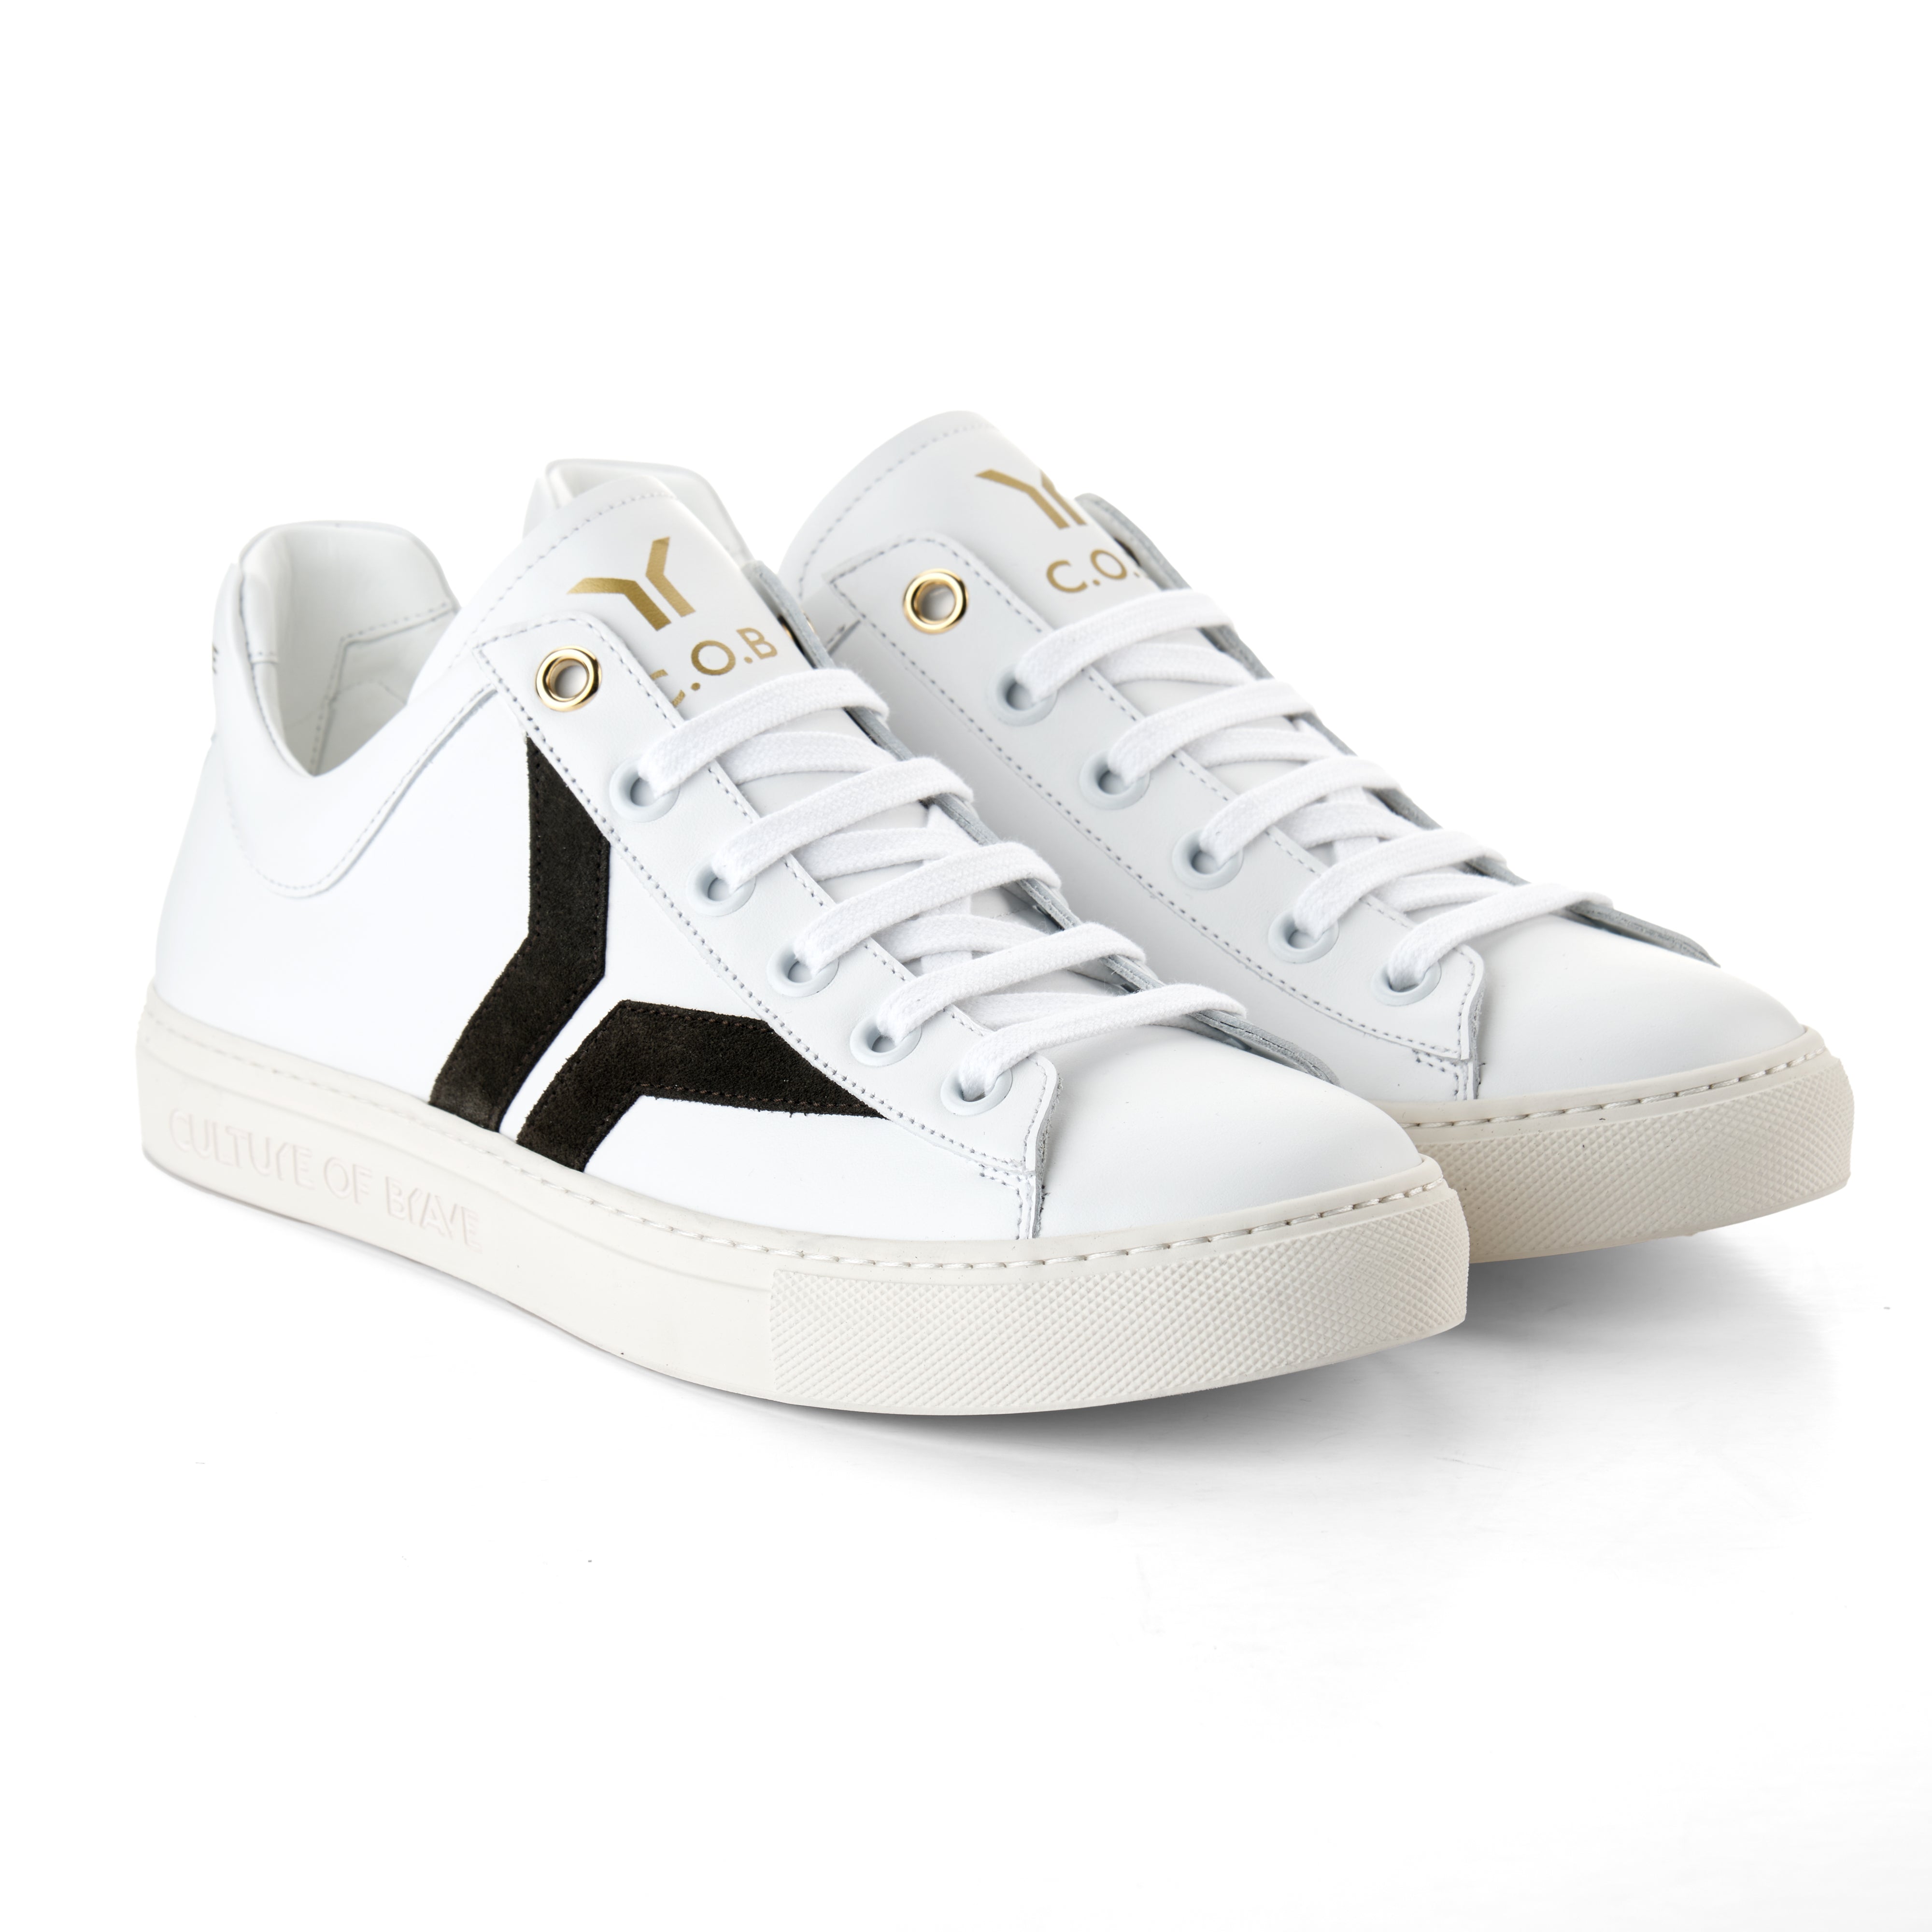 Courage S30 Women White leather brown wing low cut